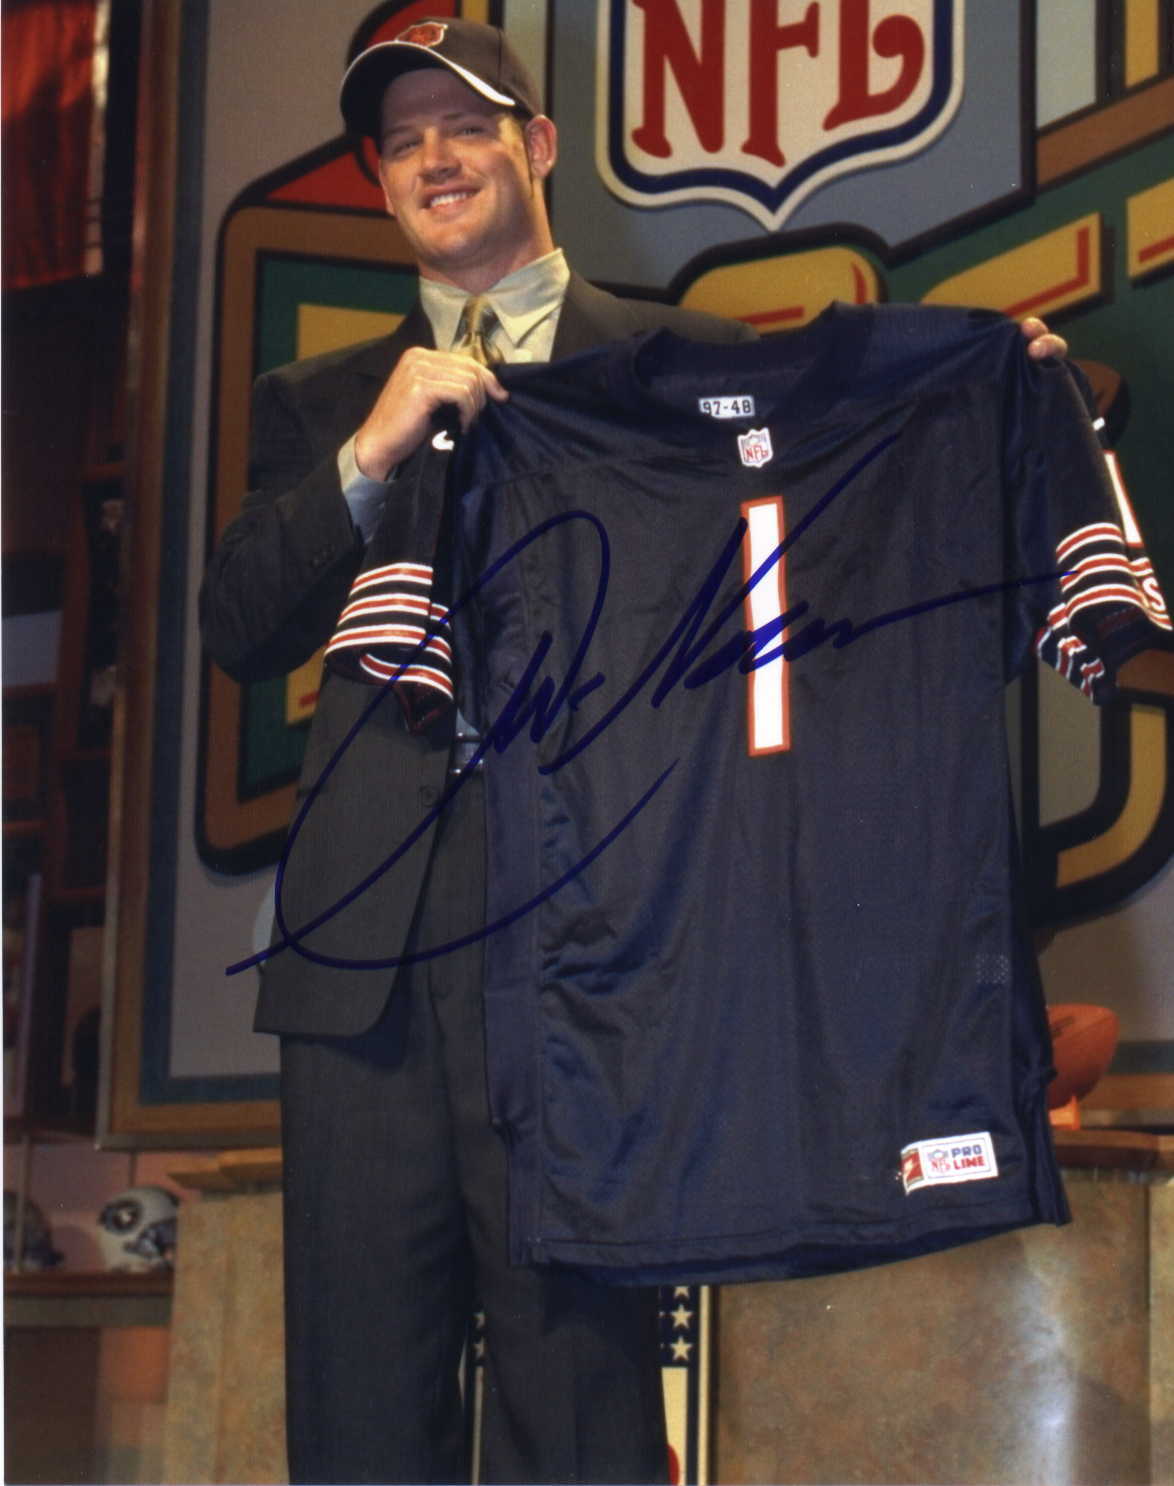 cade mcnown bears jersey